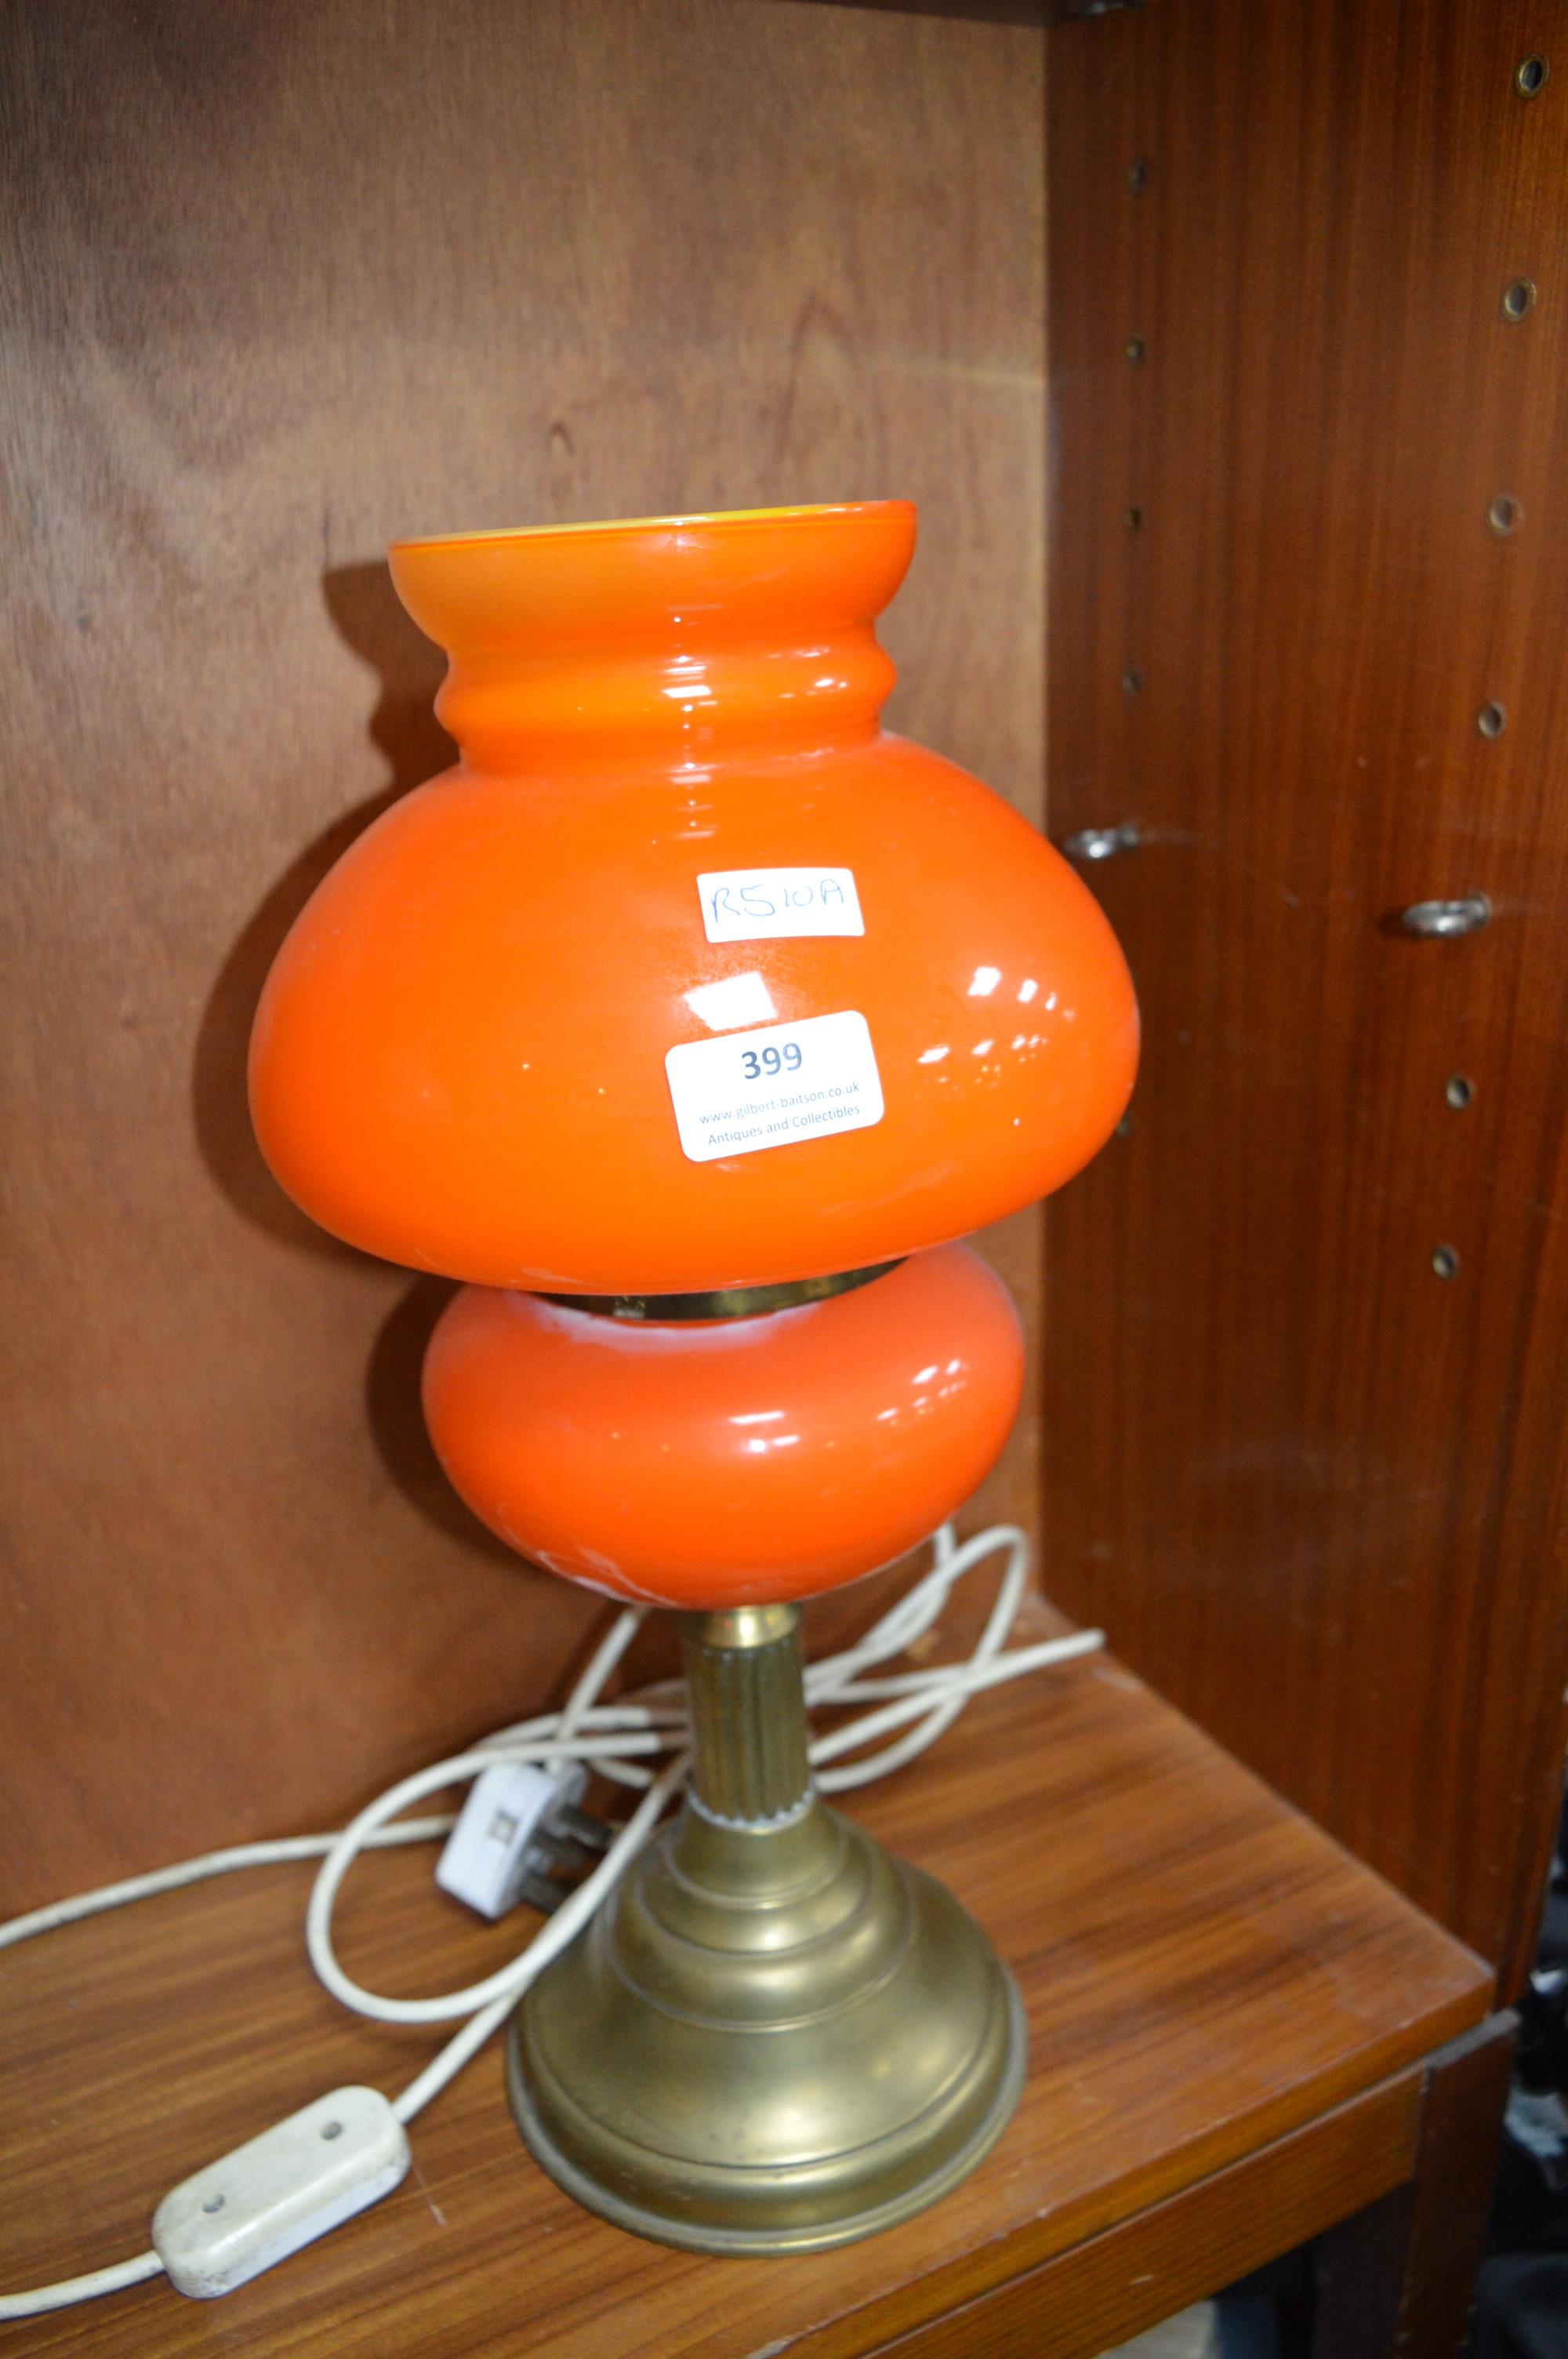 Electric Vintage Style Lamp